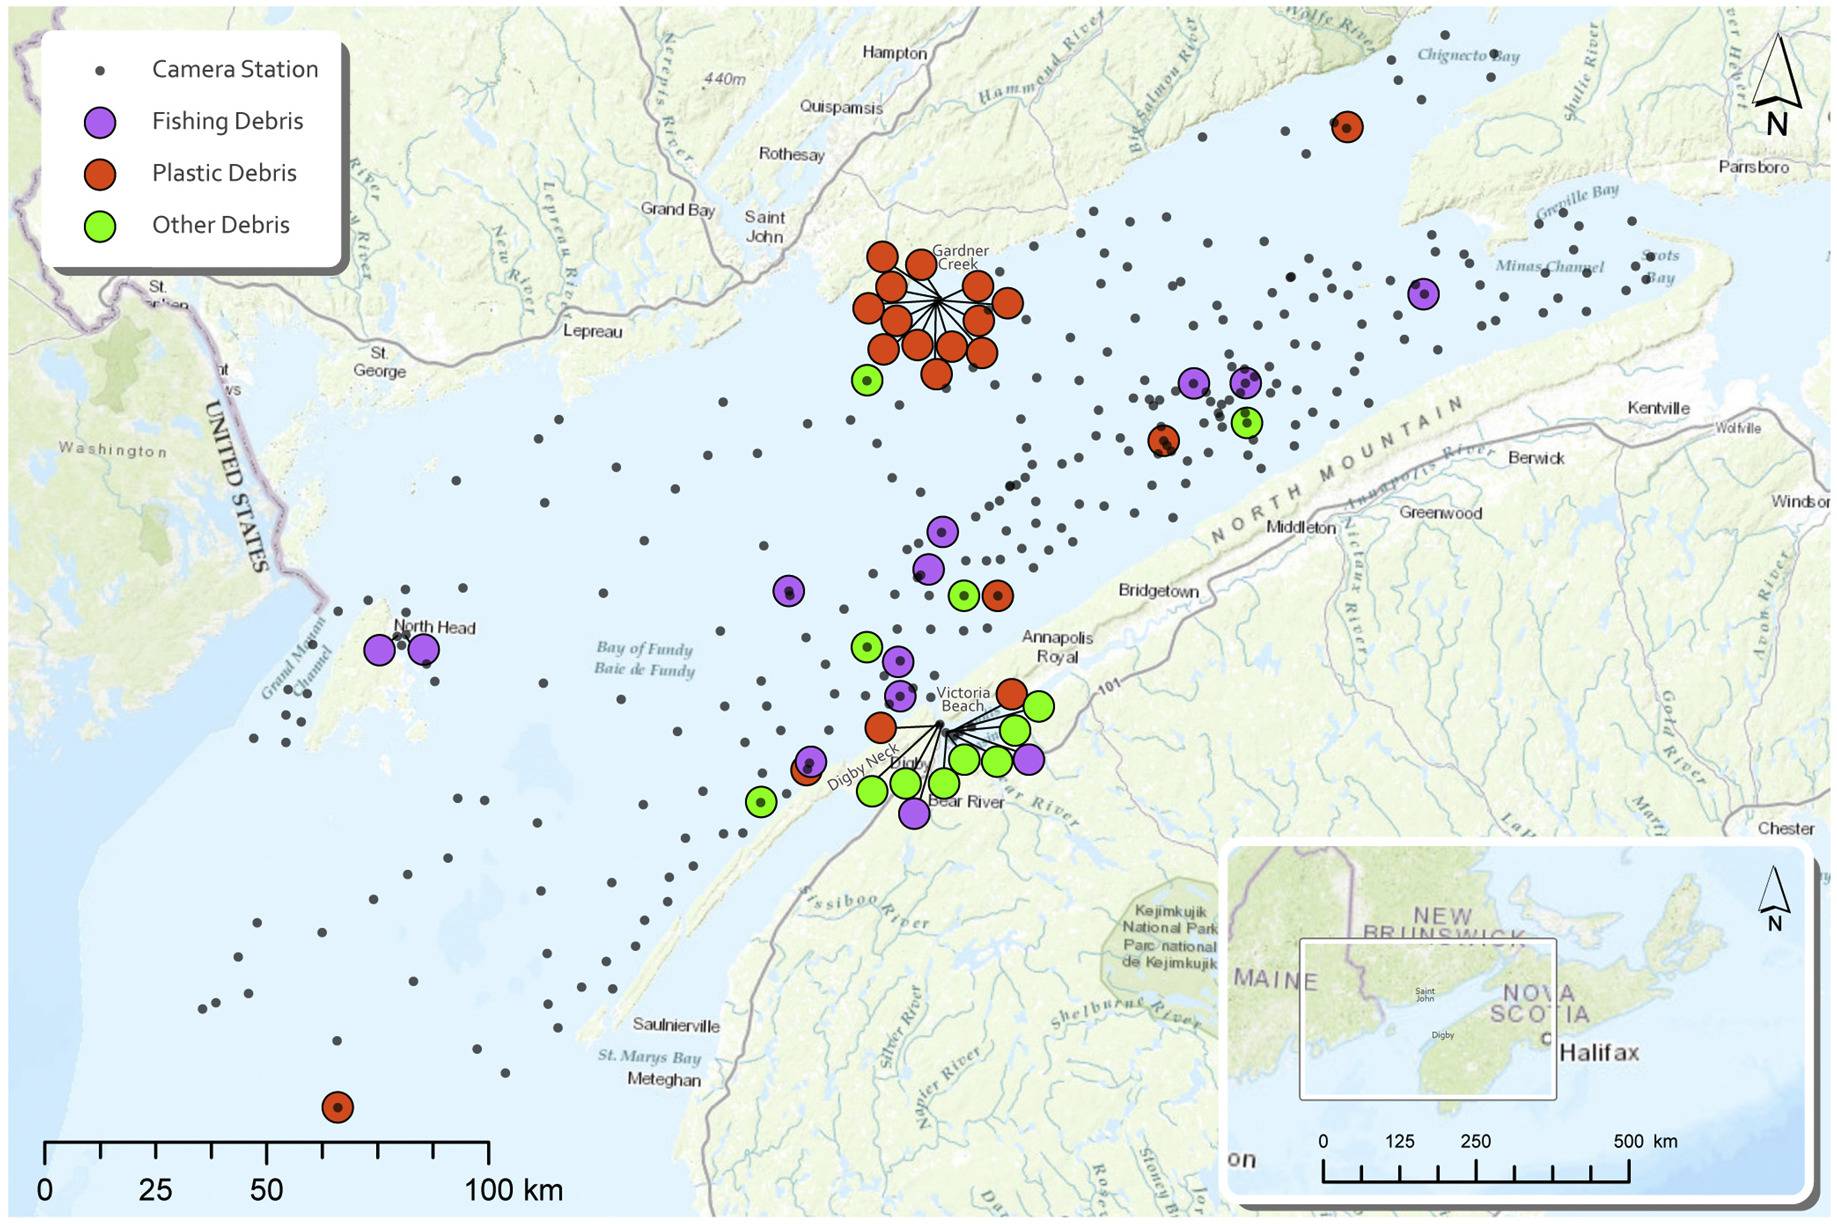 A distribution map shows hotspots of pollution on the bottom of the Bay of Fundy. (Applied Oceans Research Group at the Nova Scotia Community College and Fisheries and Oceans Canada)